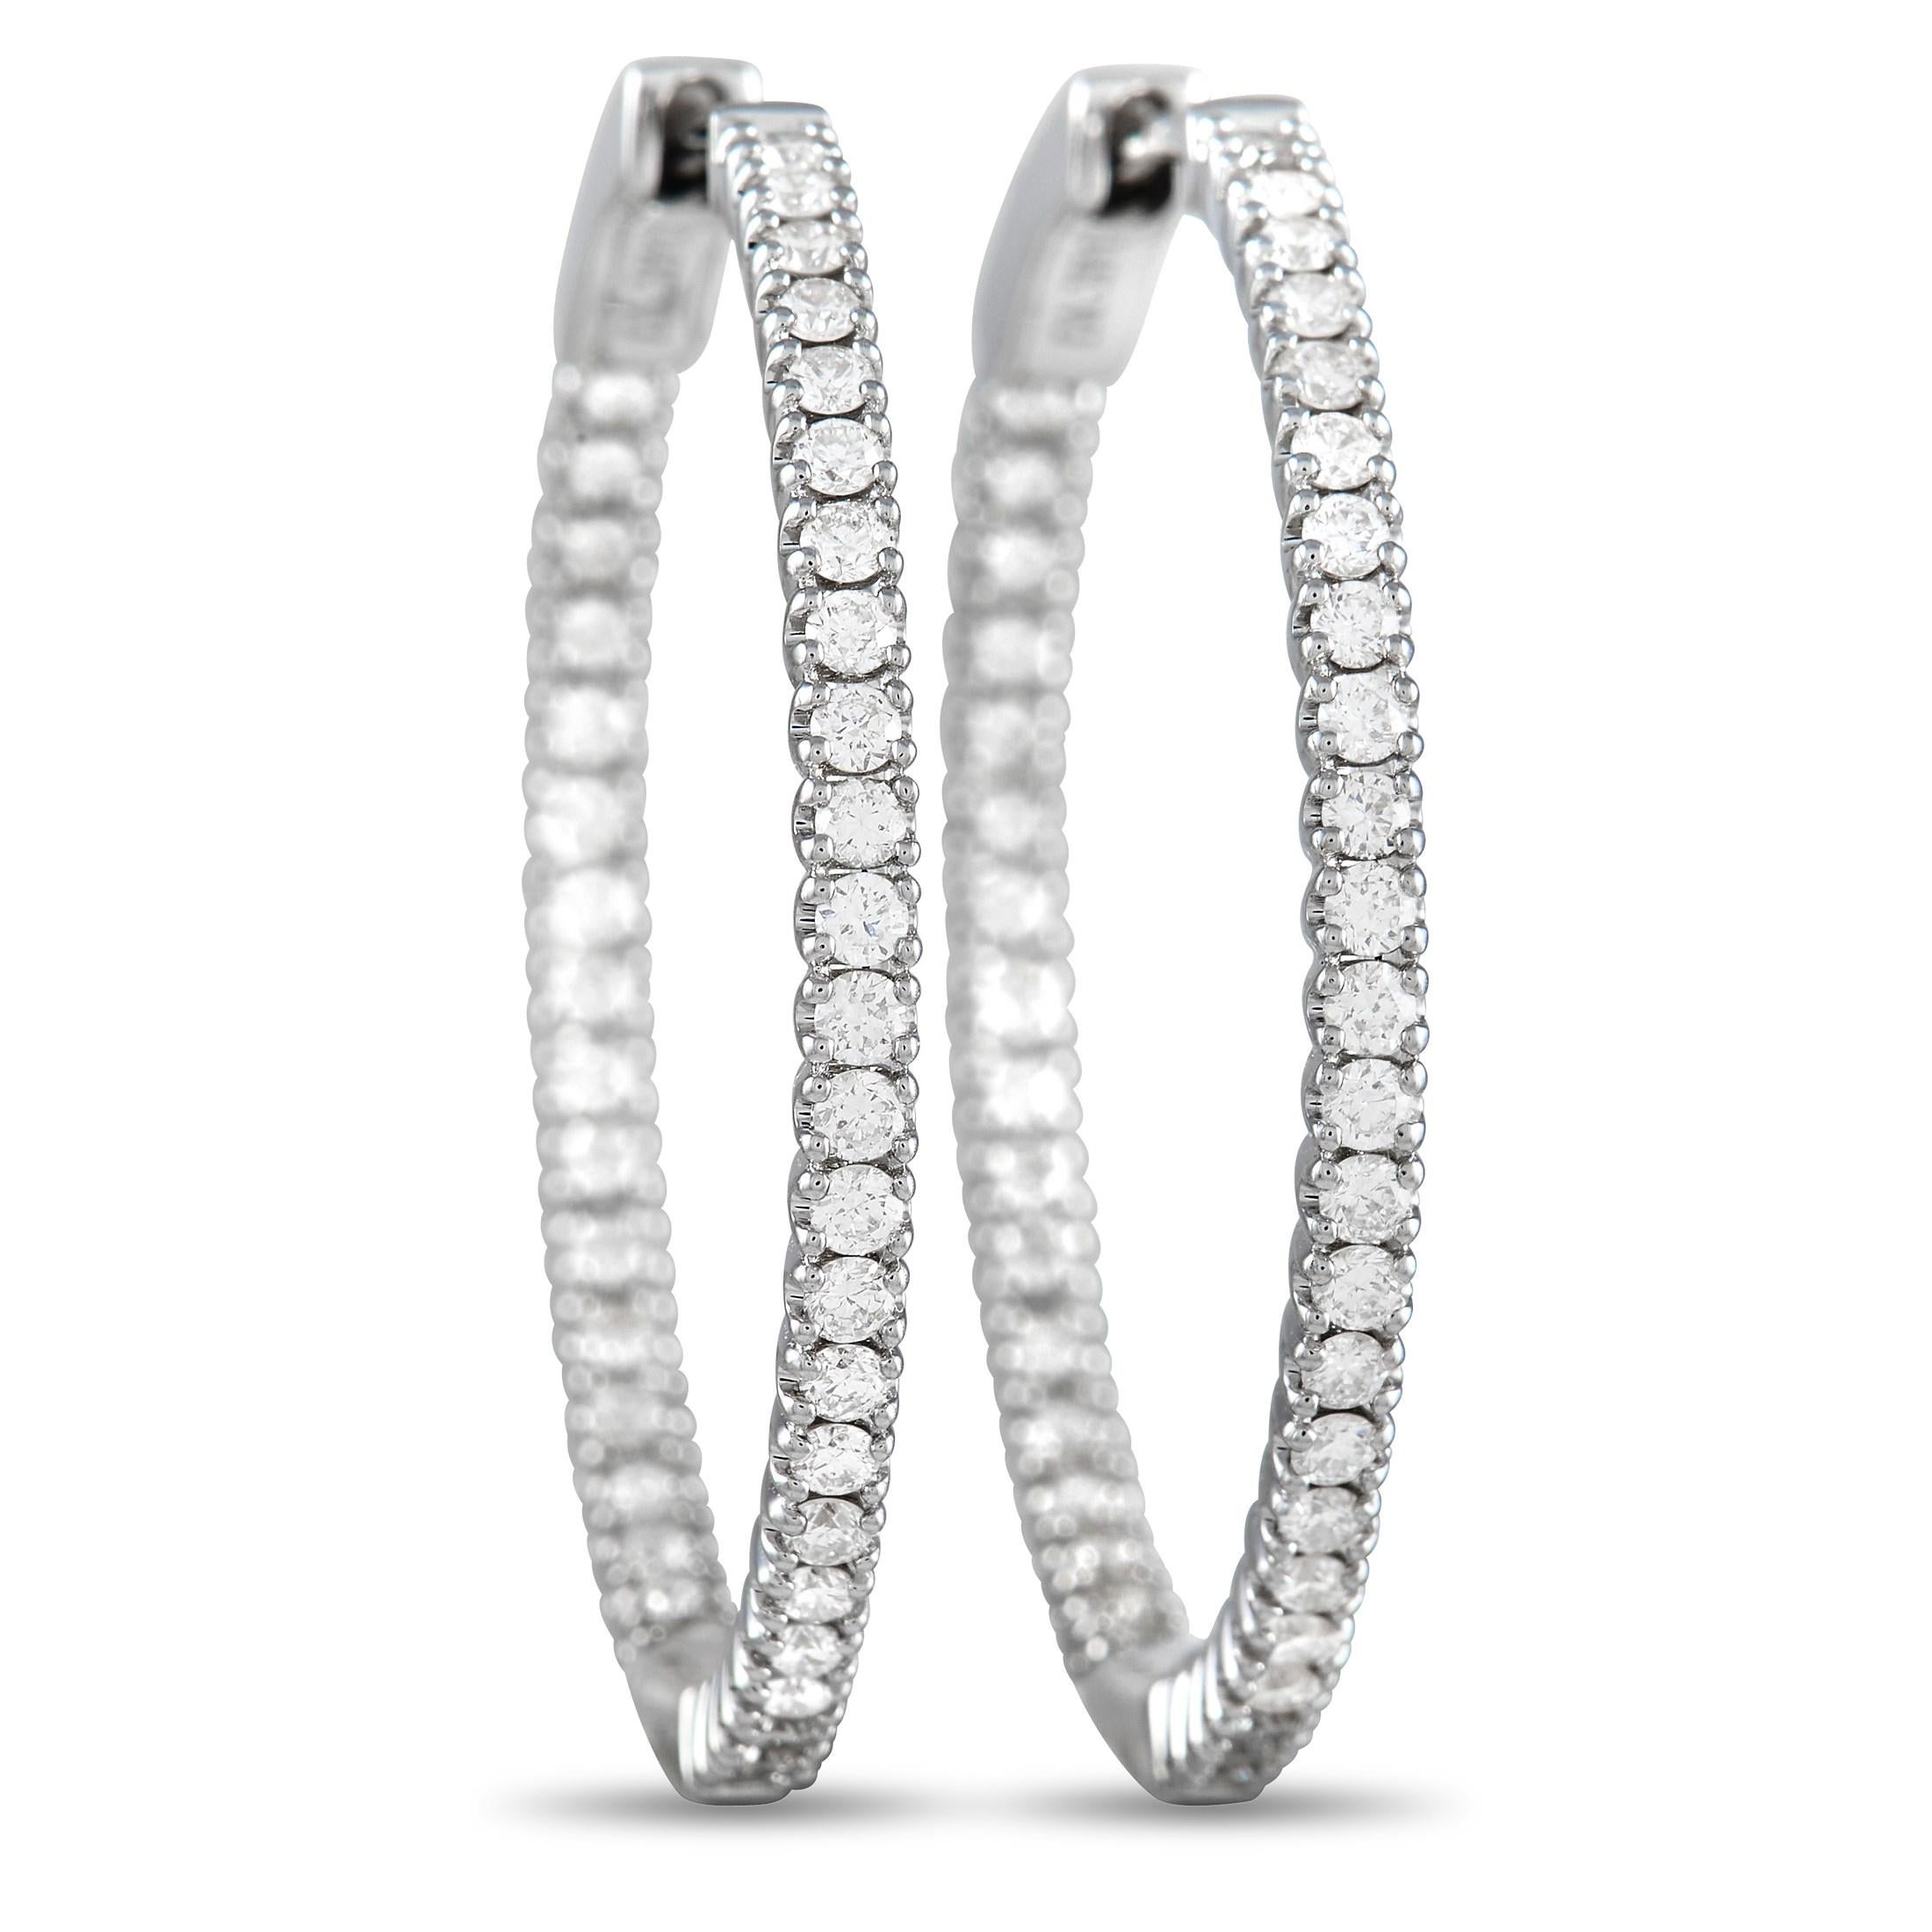 Sleek and stylish, these 14K White Gold hoop earrings will never go out of style. The minimalist design allows their 0.98 carats of sparkling inset diamonds to take center stage. Each one measures 1.15” round, making them as comfortable as they are